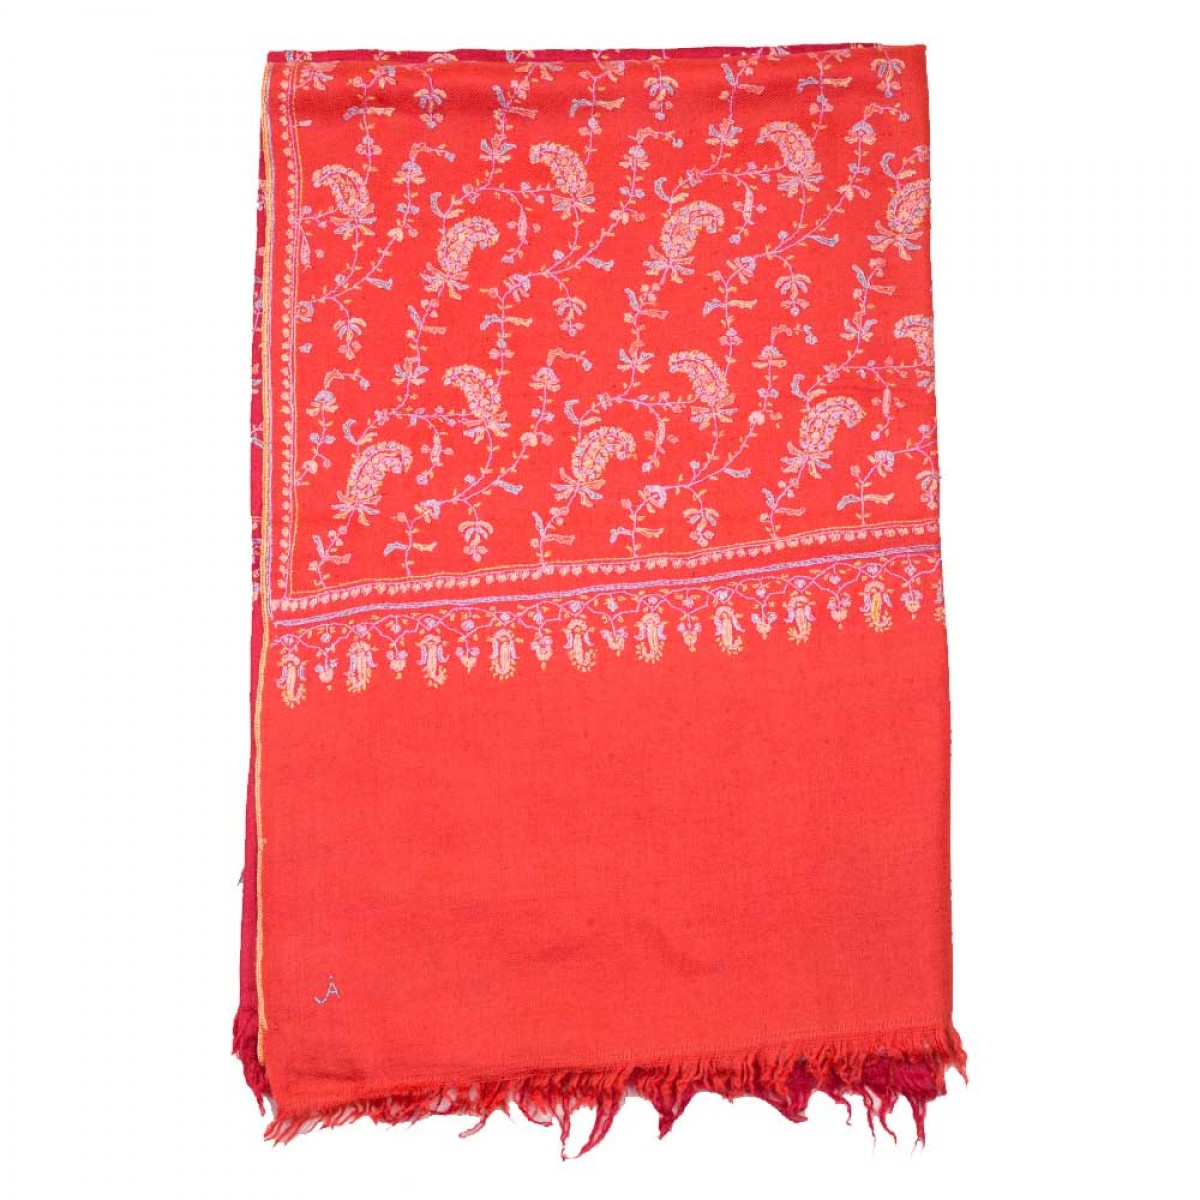 Embroidered Pashmina Shawls - Double Shaded of Red